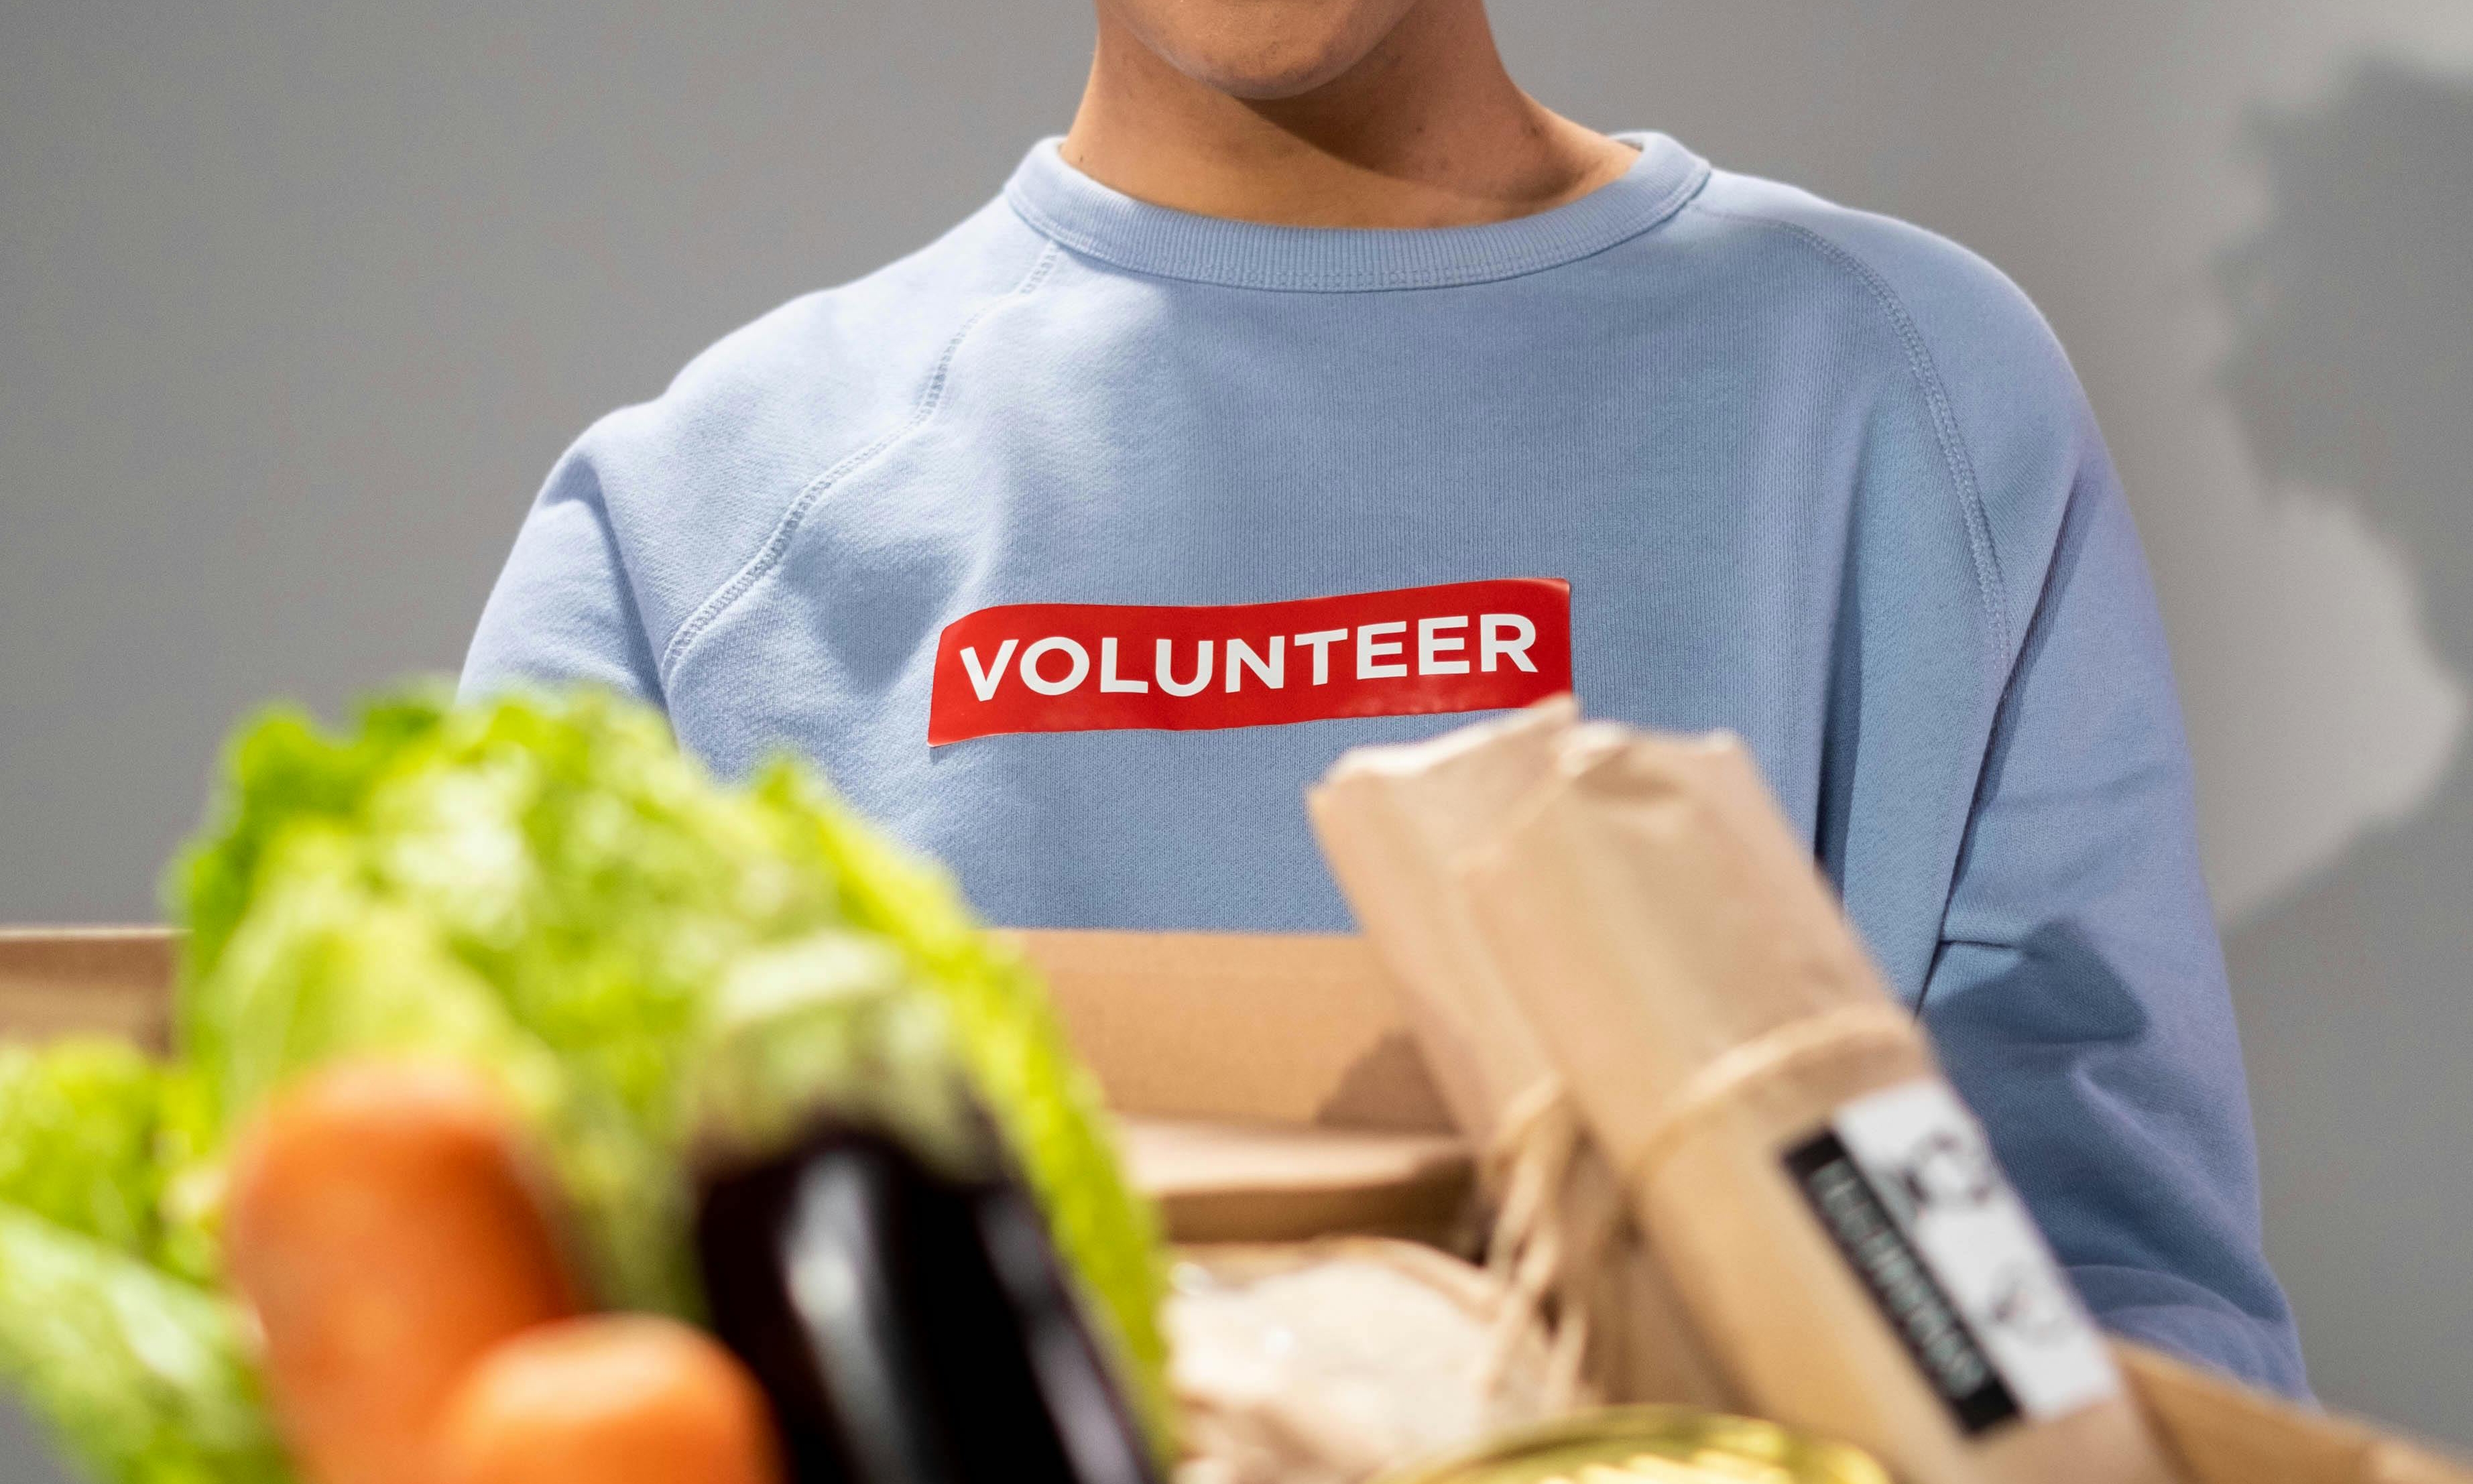 A woman with a "volunteer"-printed T-shirt holding a food parcel | Source: Pexels